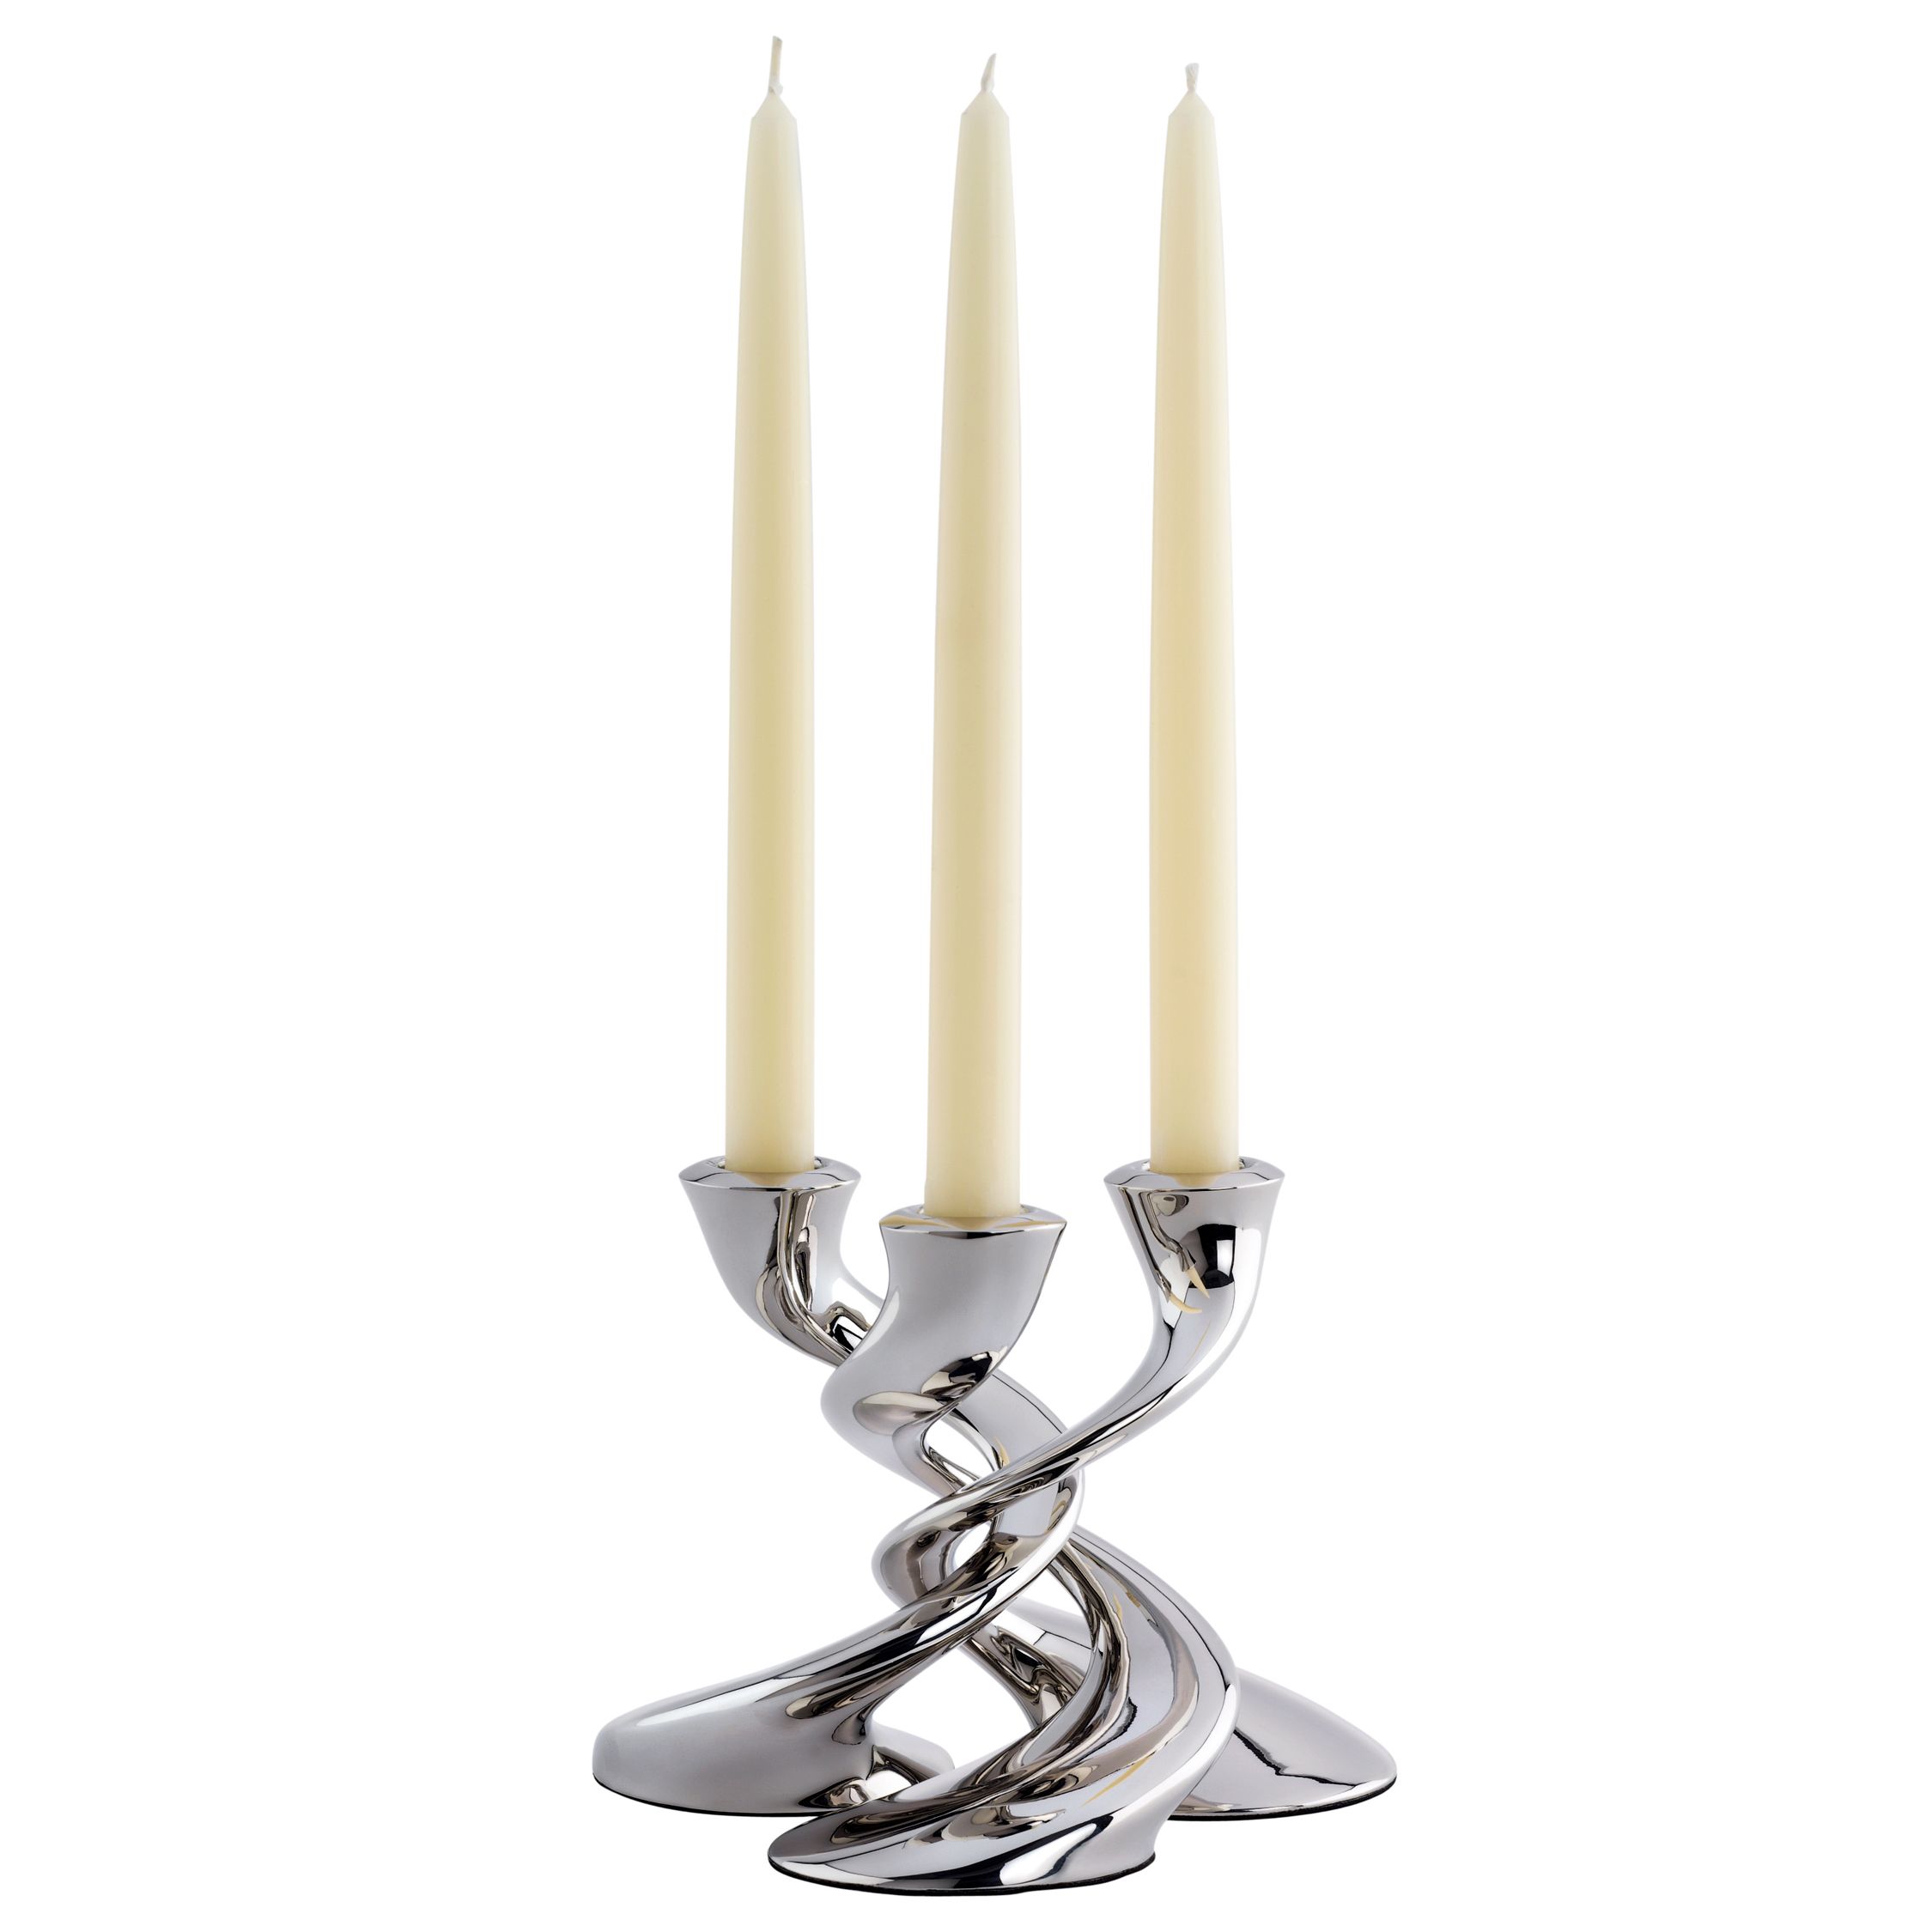 Robert Welch Windrush Stainless Steel Candlestick, Pack of 2